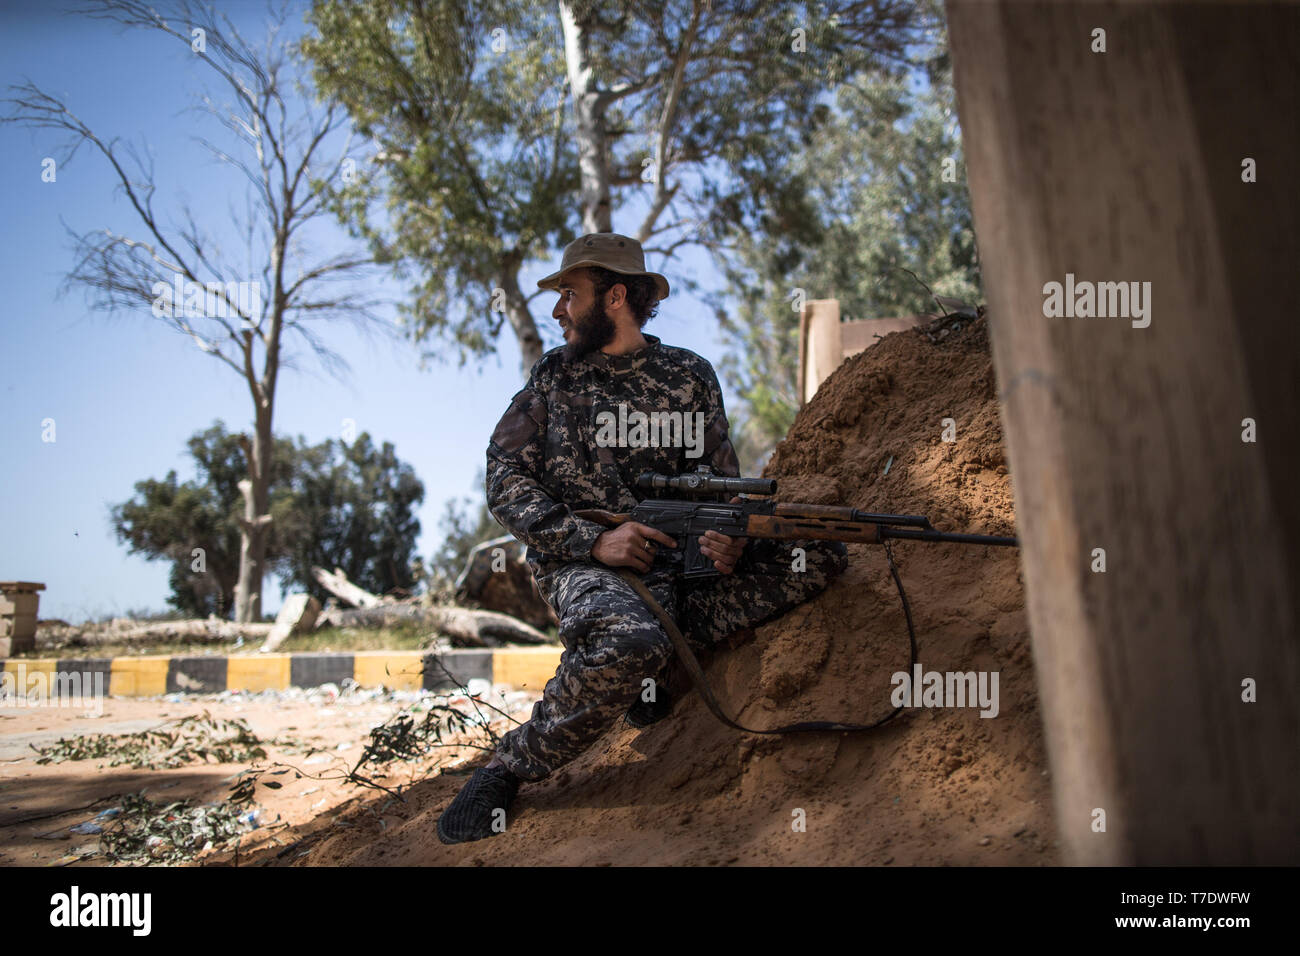 Tripoli, Libya. 6th May, 2019. A fighter from forces of the UN-backed Libyan government is seen in Salah Al-Din frontline, Tripoli, Libya, on May 6, 2019. A total of 432 people have been killed and 2,069 others injured in the fighting between the UN-backed Libyan government and the east-based army in and around the capital Tripoli, the World Health Organization (WHO) said Monday. Credit: Amru Salahuddien/Xinhua/Alamy Live News Stock Photo